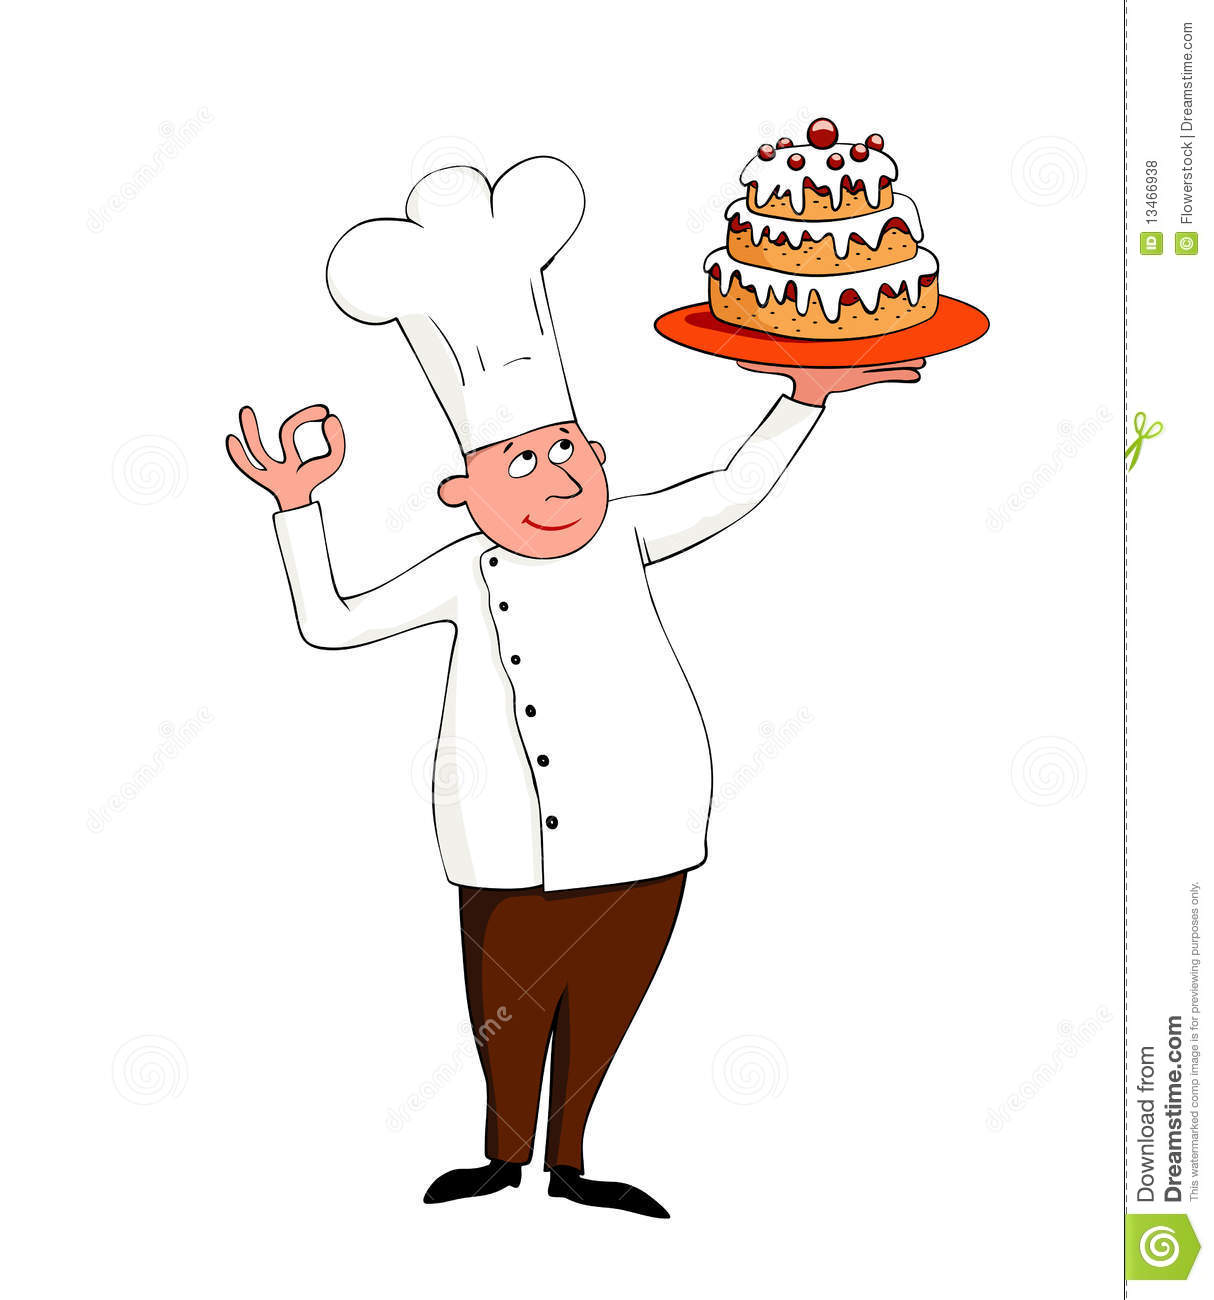 Chef With A Cake Royalty Free Stock Photos   Image  13466938